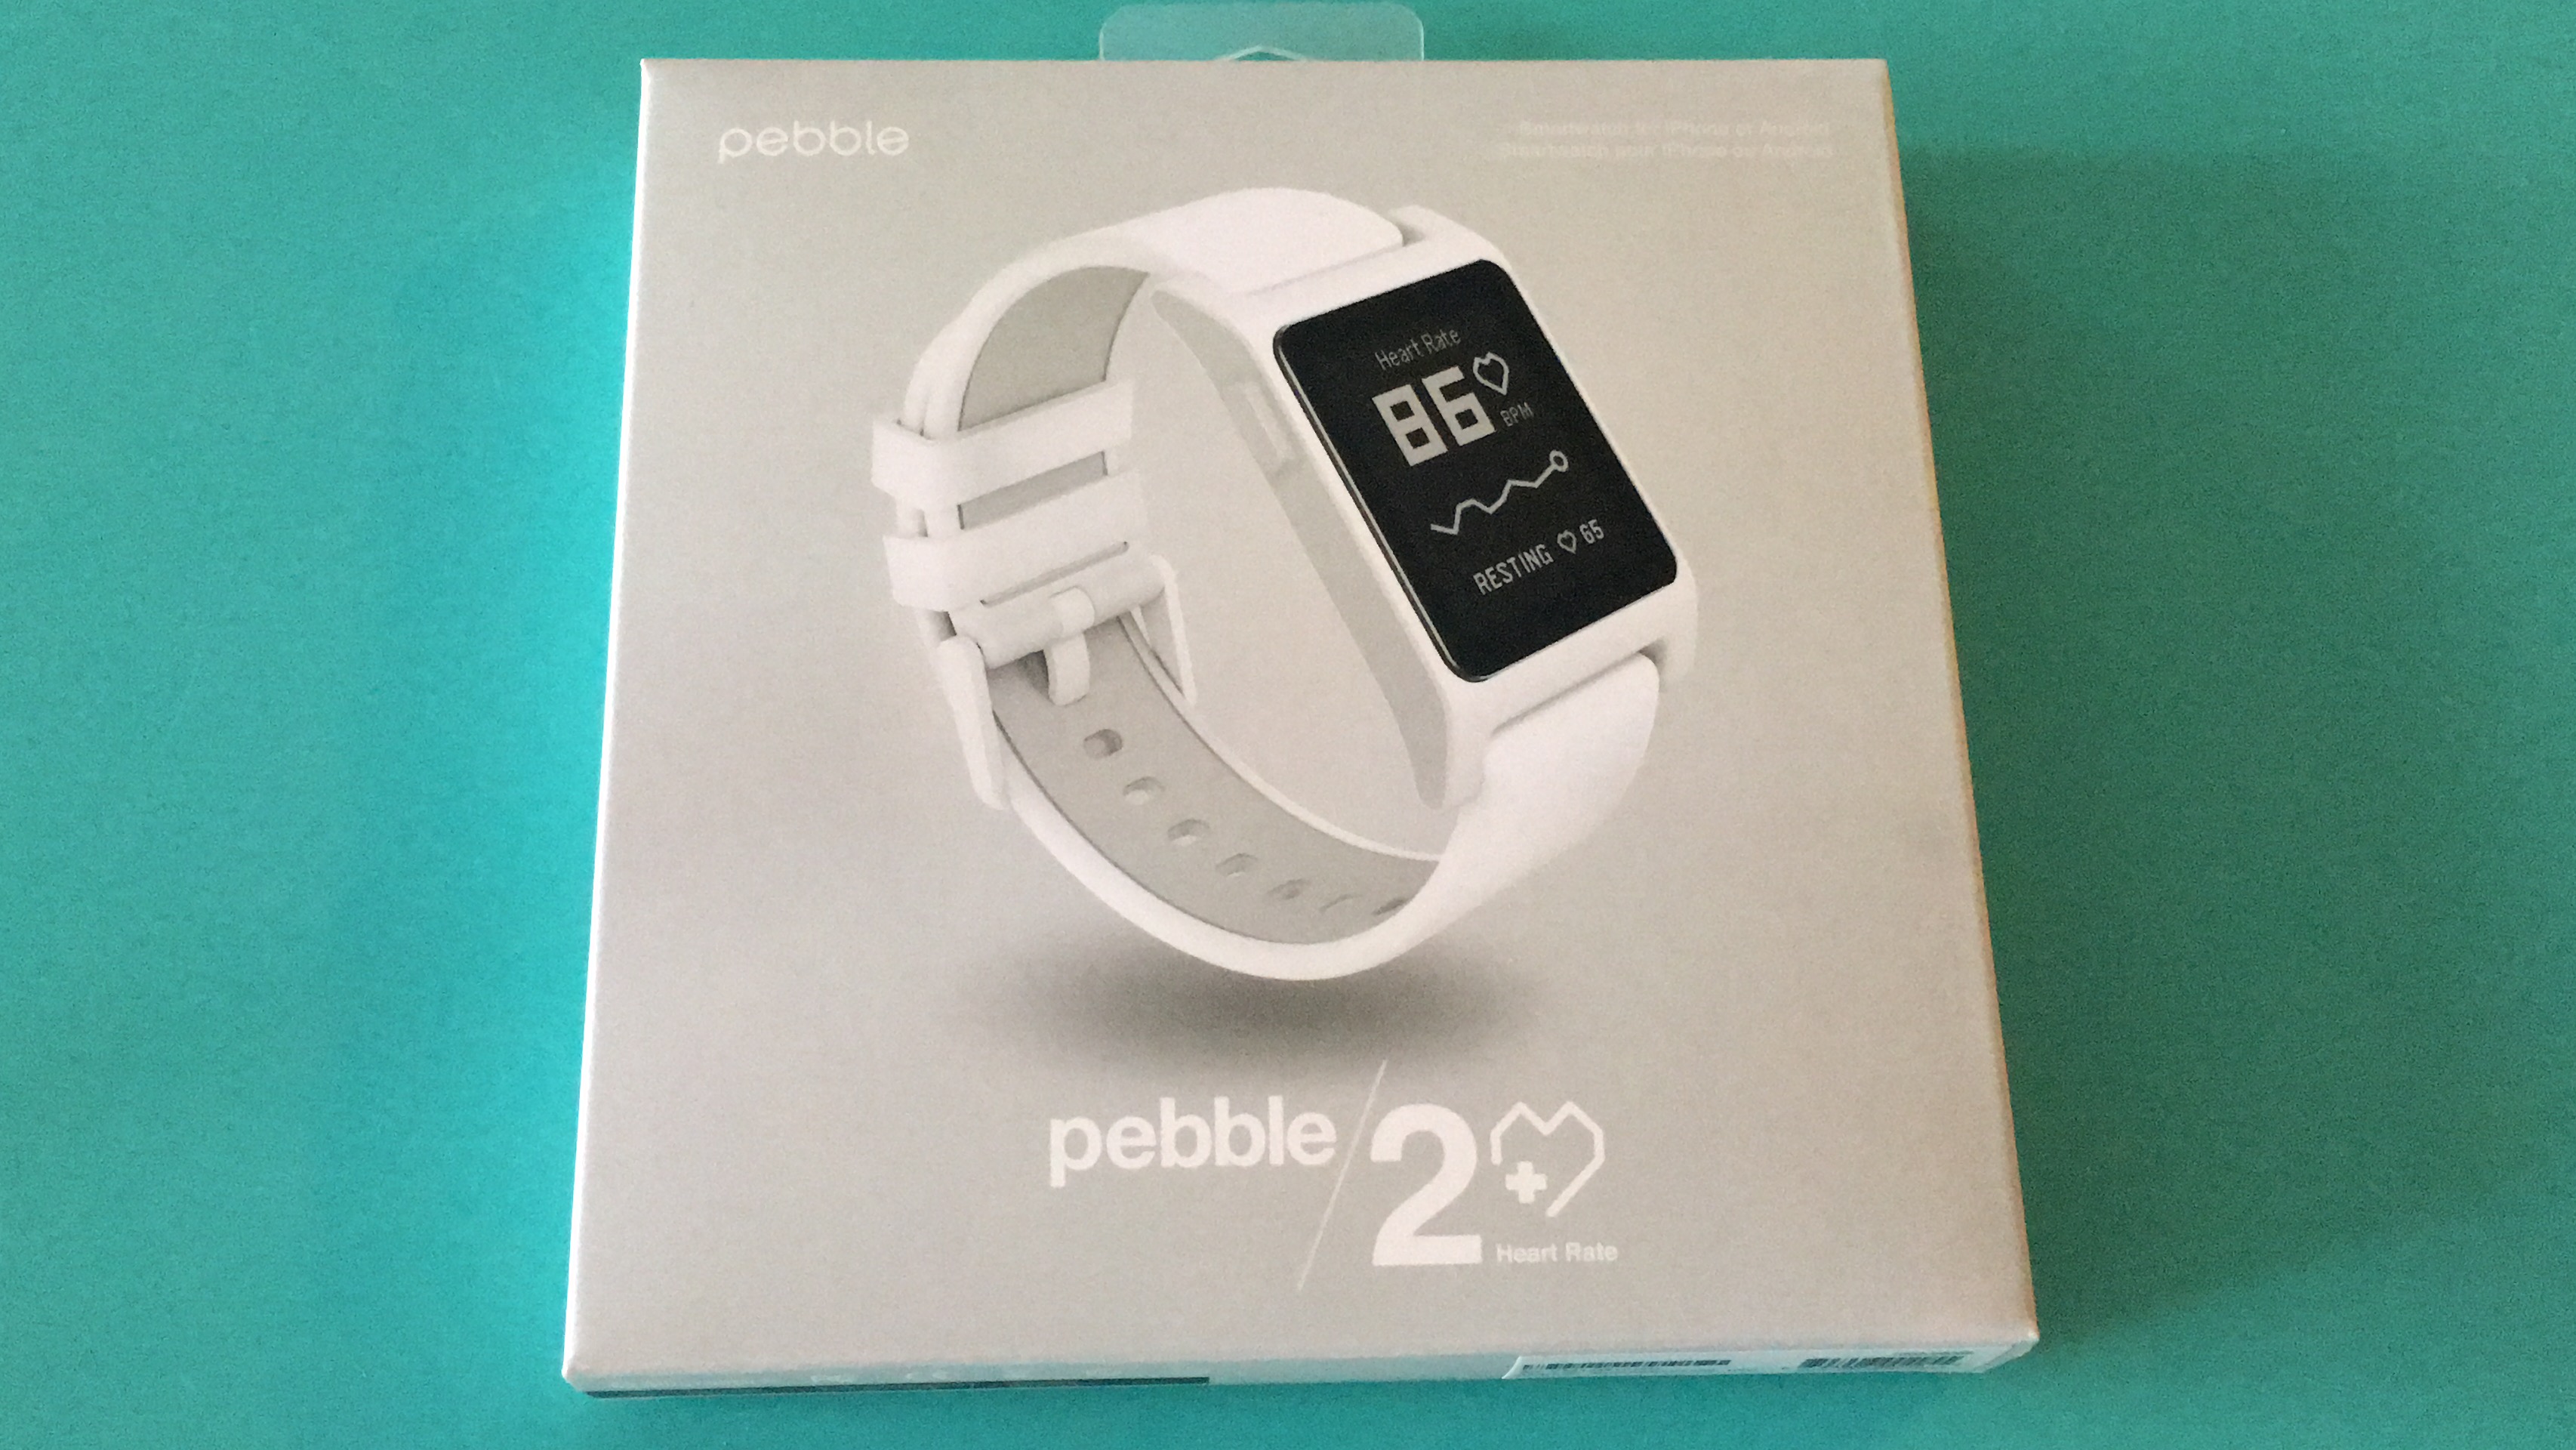 Pebble 2 Smartwatch Review: Health Tracker Meets Geeky Chic | Best Buy Blog